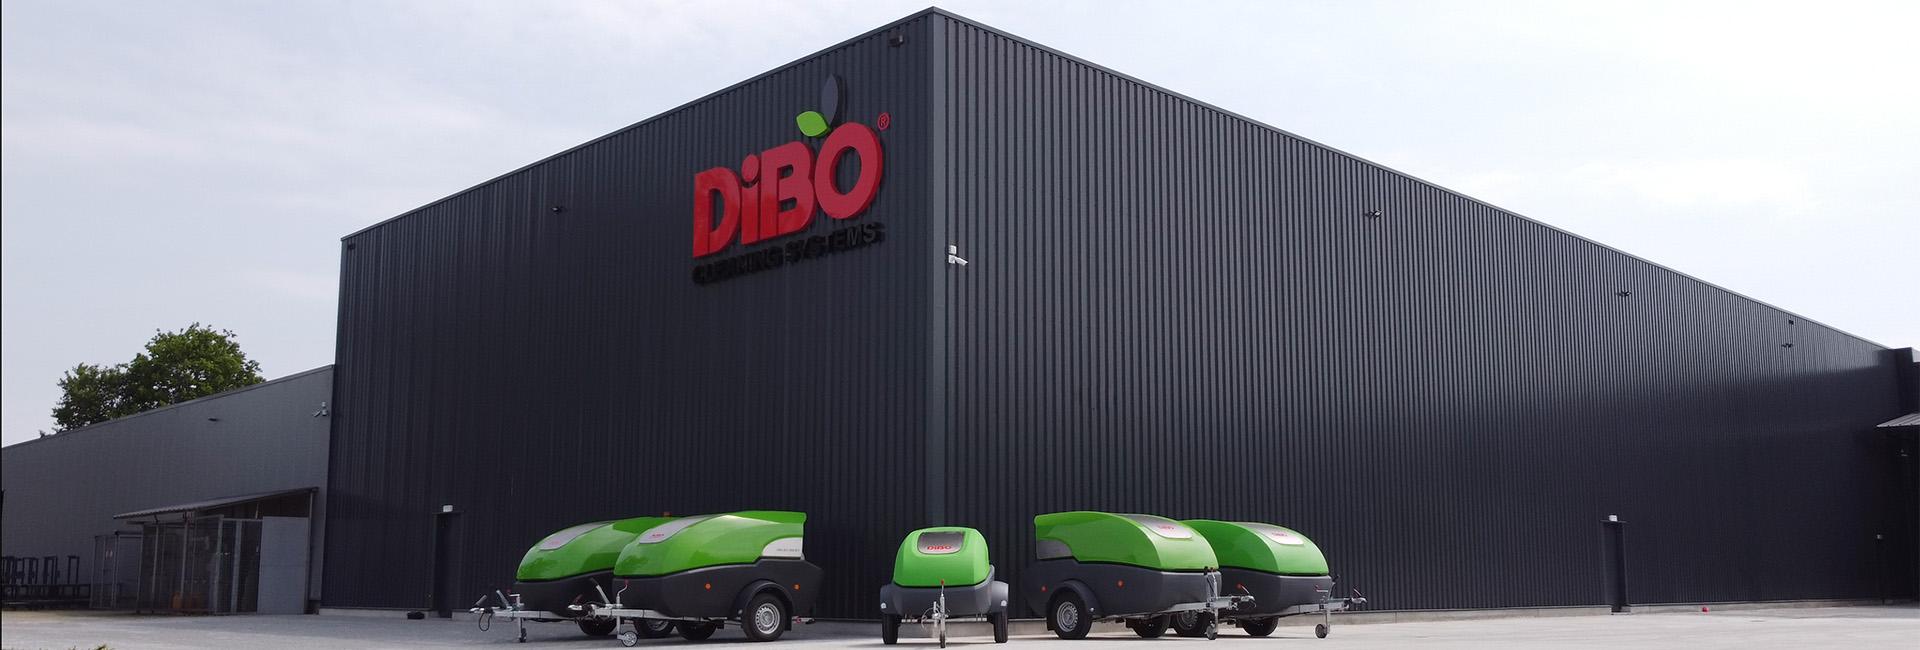 DiBO high-pressure trailers lined up for transport 